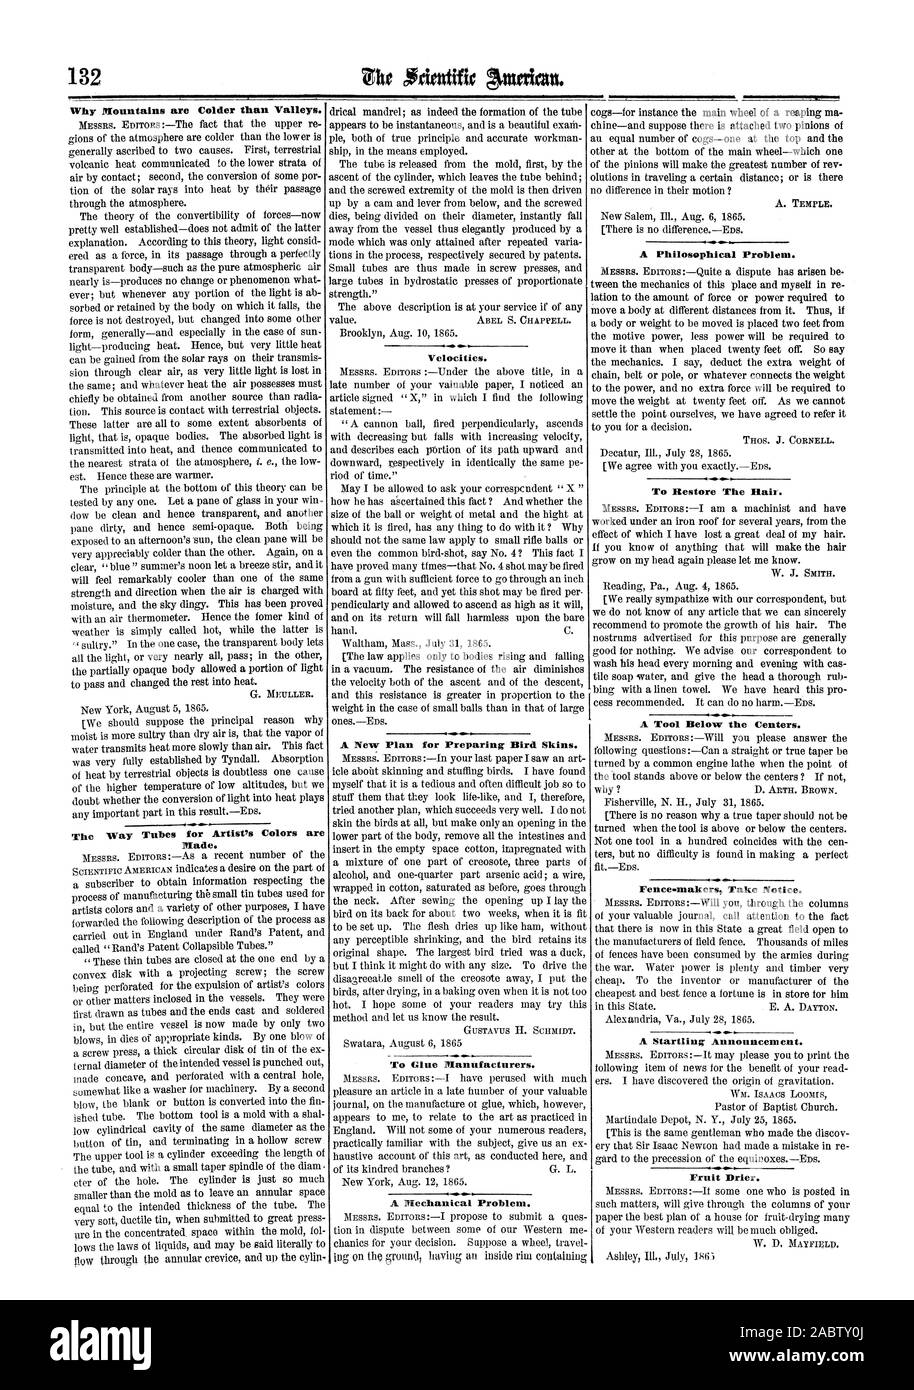 132 A Philosophical Problem. Why Mountains are Colder than Valleys. To Restore The Hair. Velocities. A A New Plan for Preparing Bird Skins. A Tool Below the Centers. AO VIP Fence-makers Take Notice. Fruit Drier. The Way Tubes for Artist's Colors are Made. To Glue Manufacturers. A Mechanical Problem. scientific american, 1865-08-26 Stock Photo